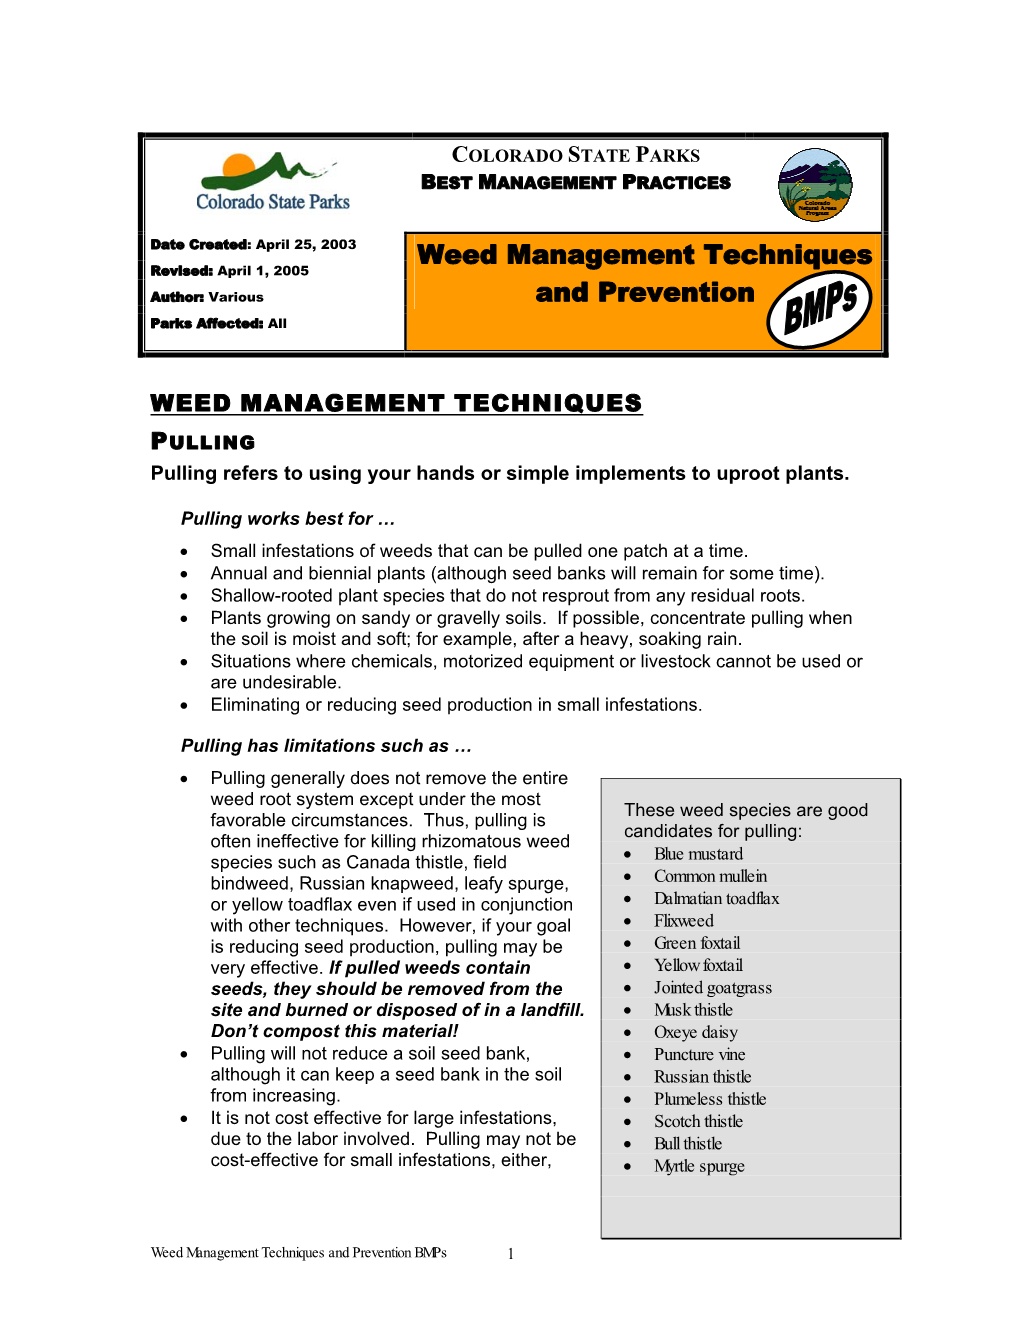 Weed Management Techniques and Prevention Bmps 1 Unless Plants Are Easy to Pull and a Volunteer Work Force Is Available